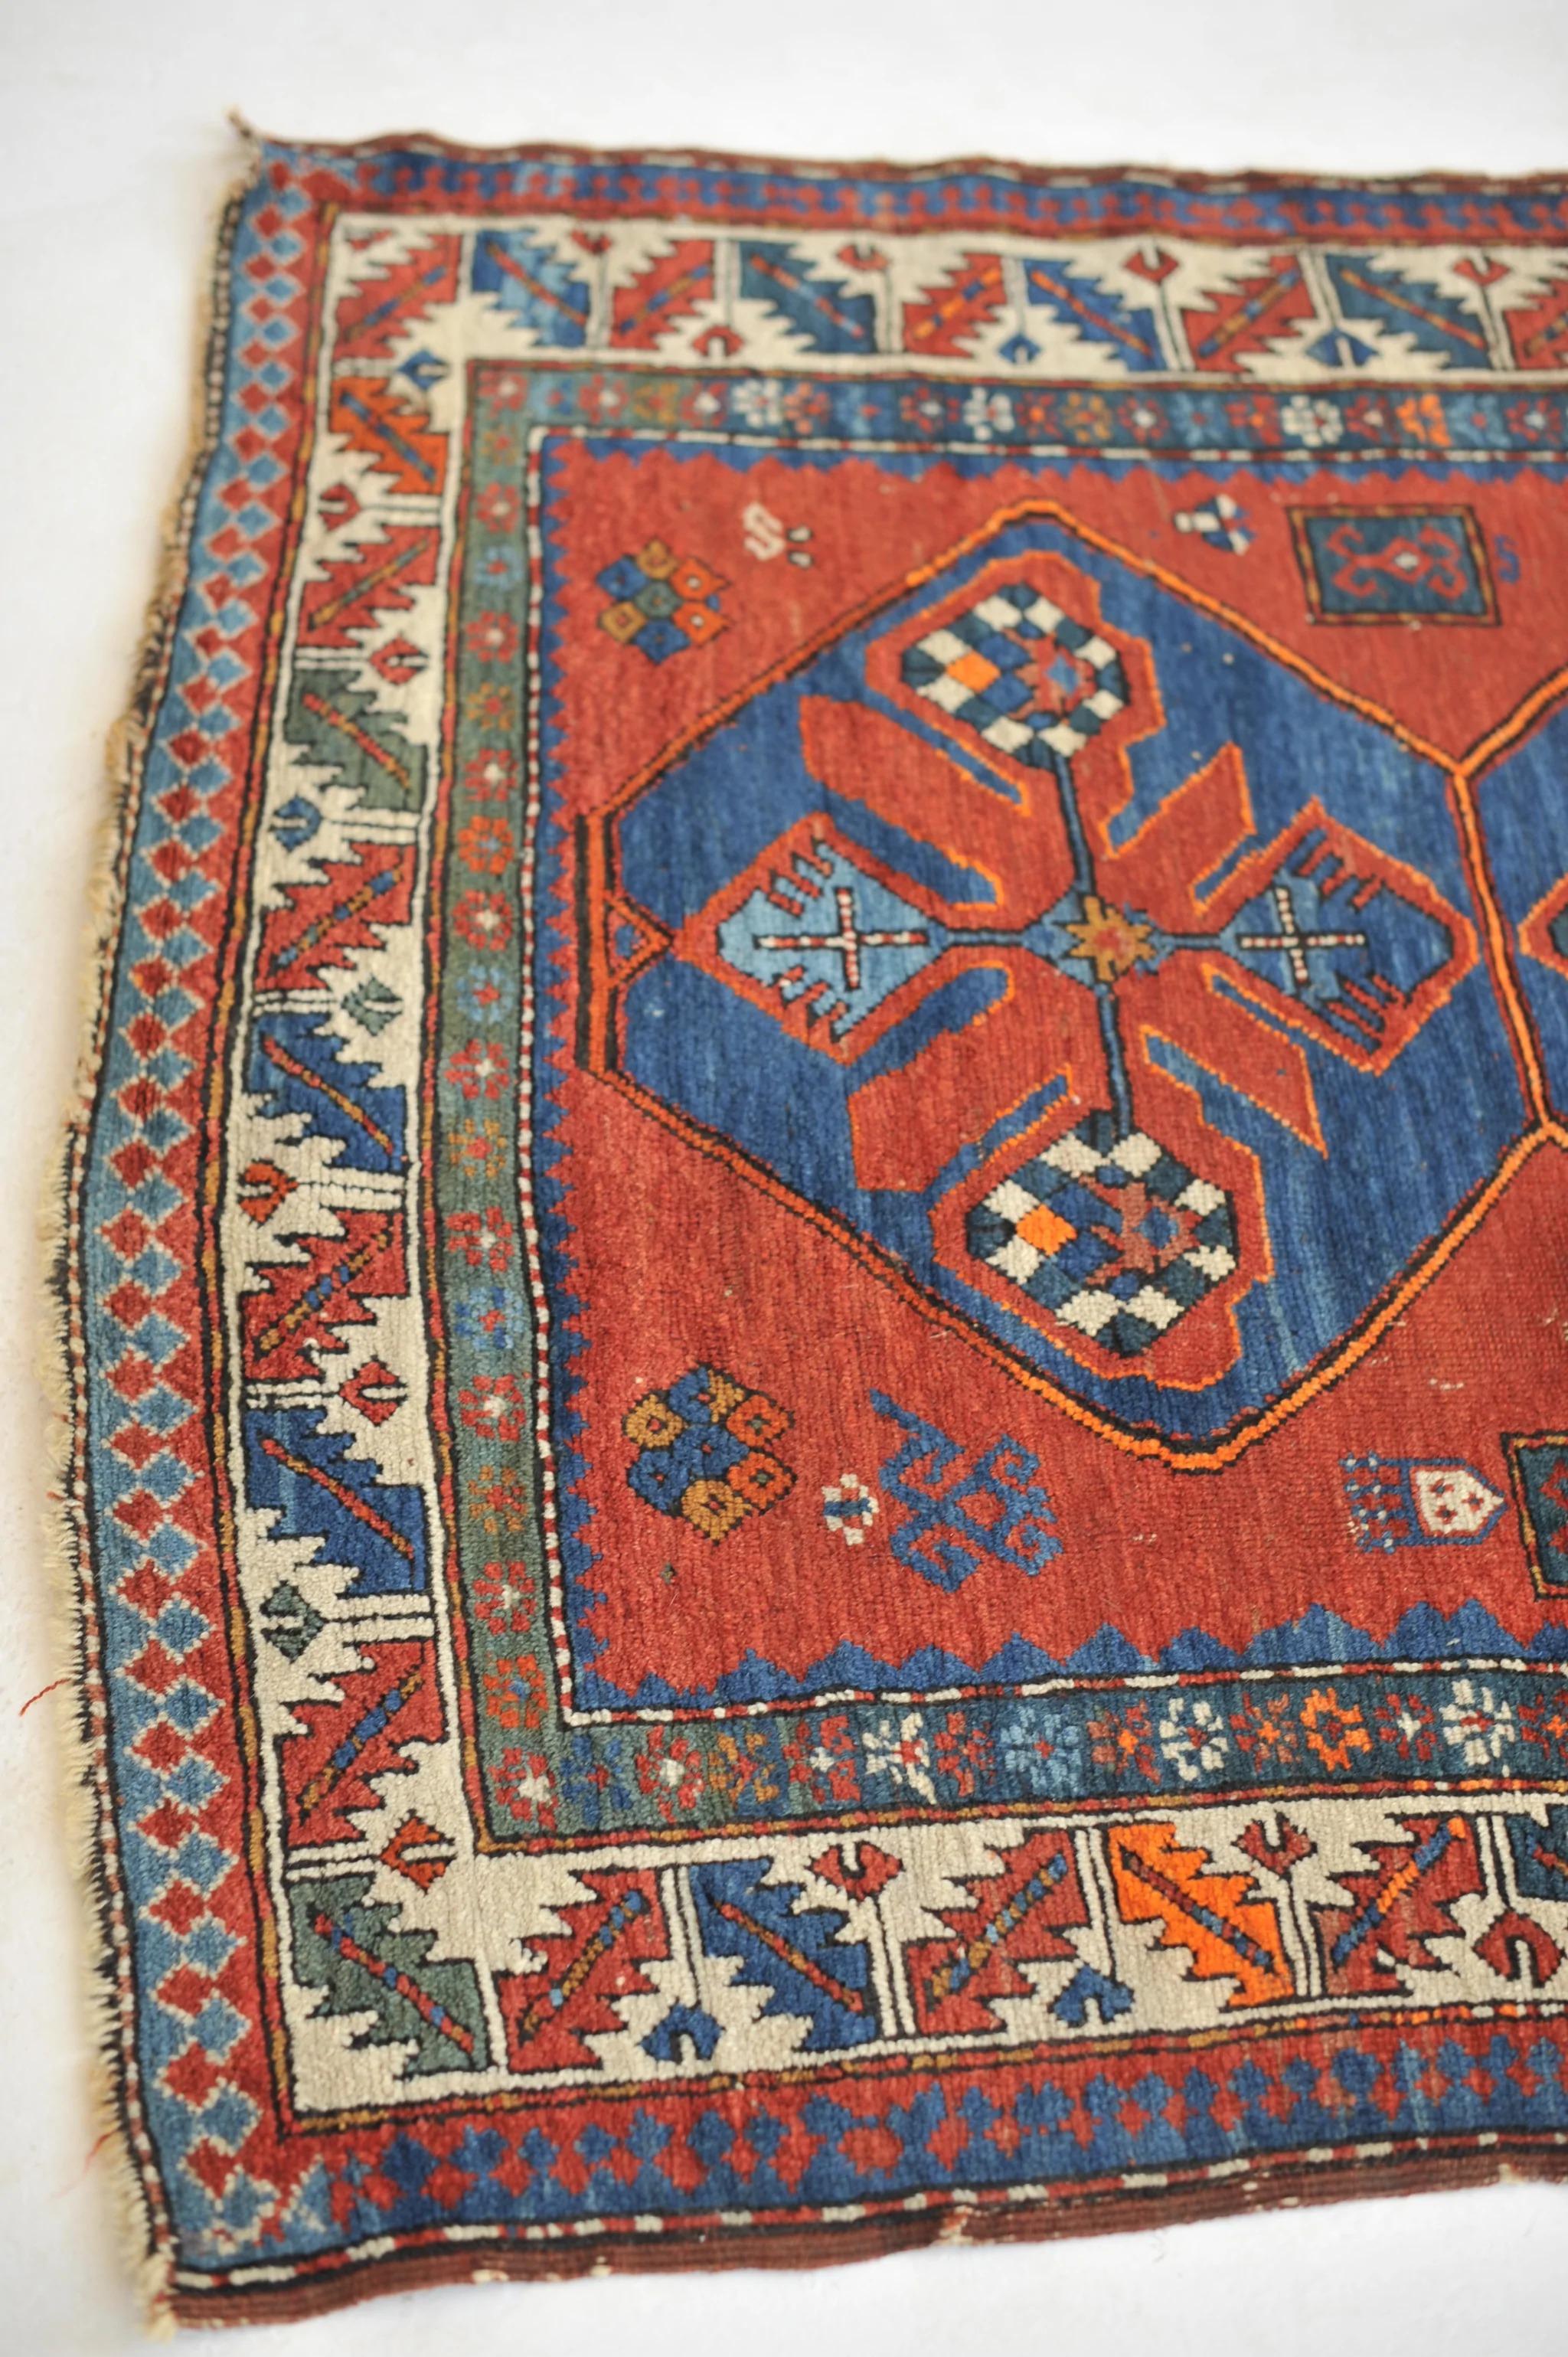 Antique Kazak with Variations of Clay, Rust, Autumn with Animals and Denim Blue

Size: 4.5 x 7.5
Age: Antique
Pile: Low with age-related patina.

This rug is one-of-a-kind, only one in the world, no others are available.

Because of the nature and